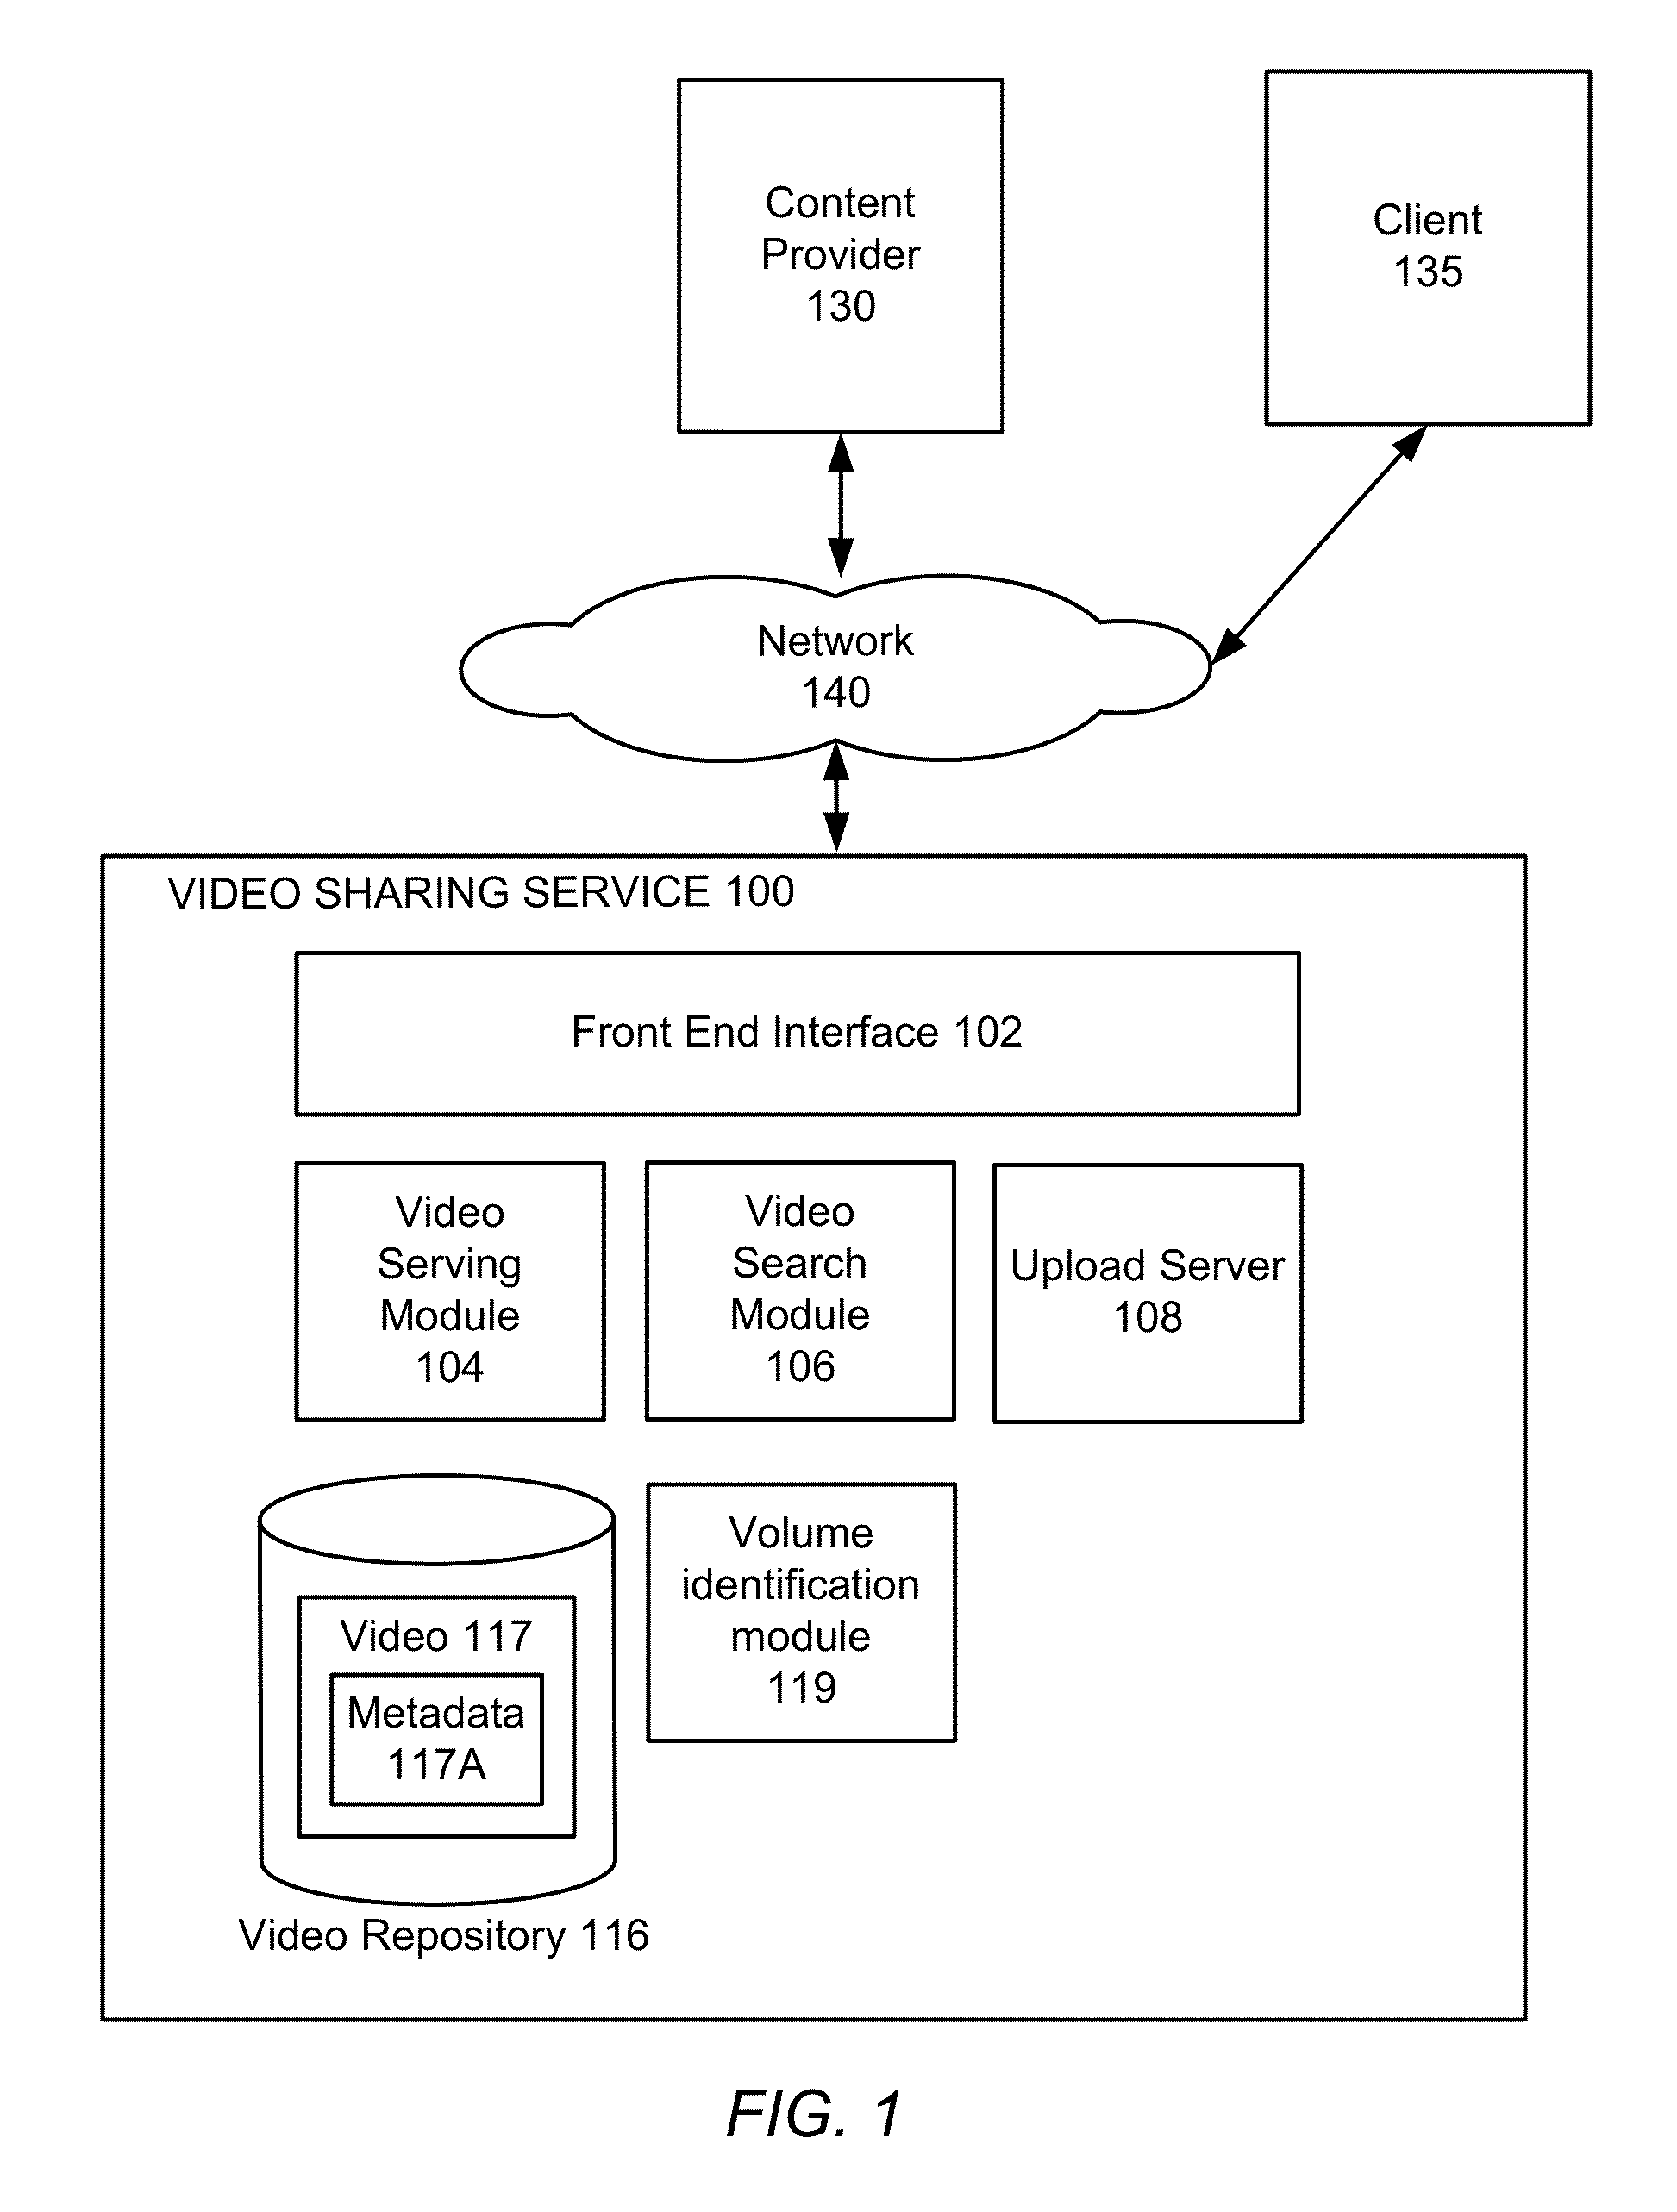 High-Confidence Labeling of Video Volumes in a Video Sharing Service